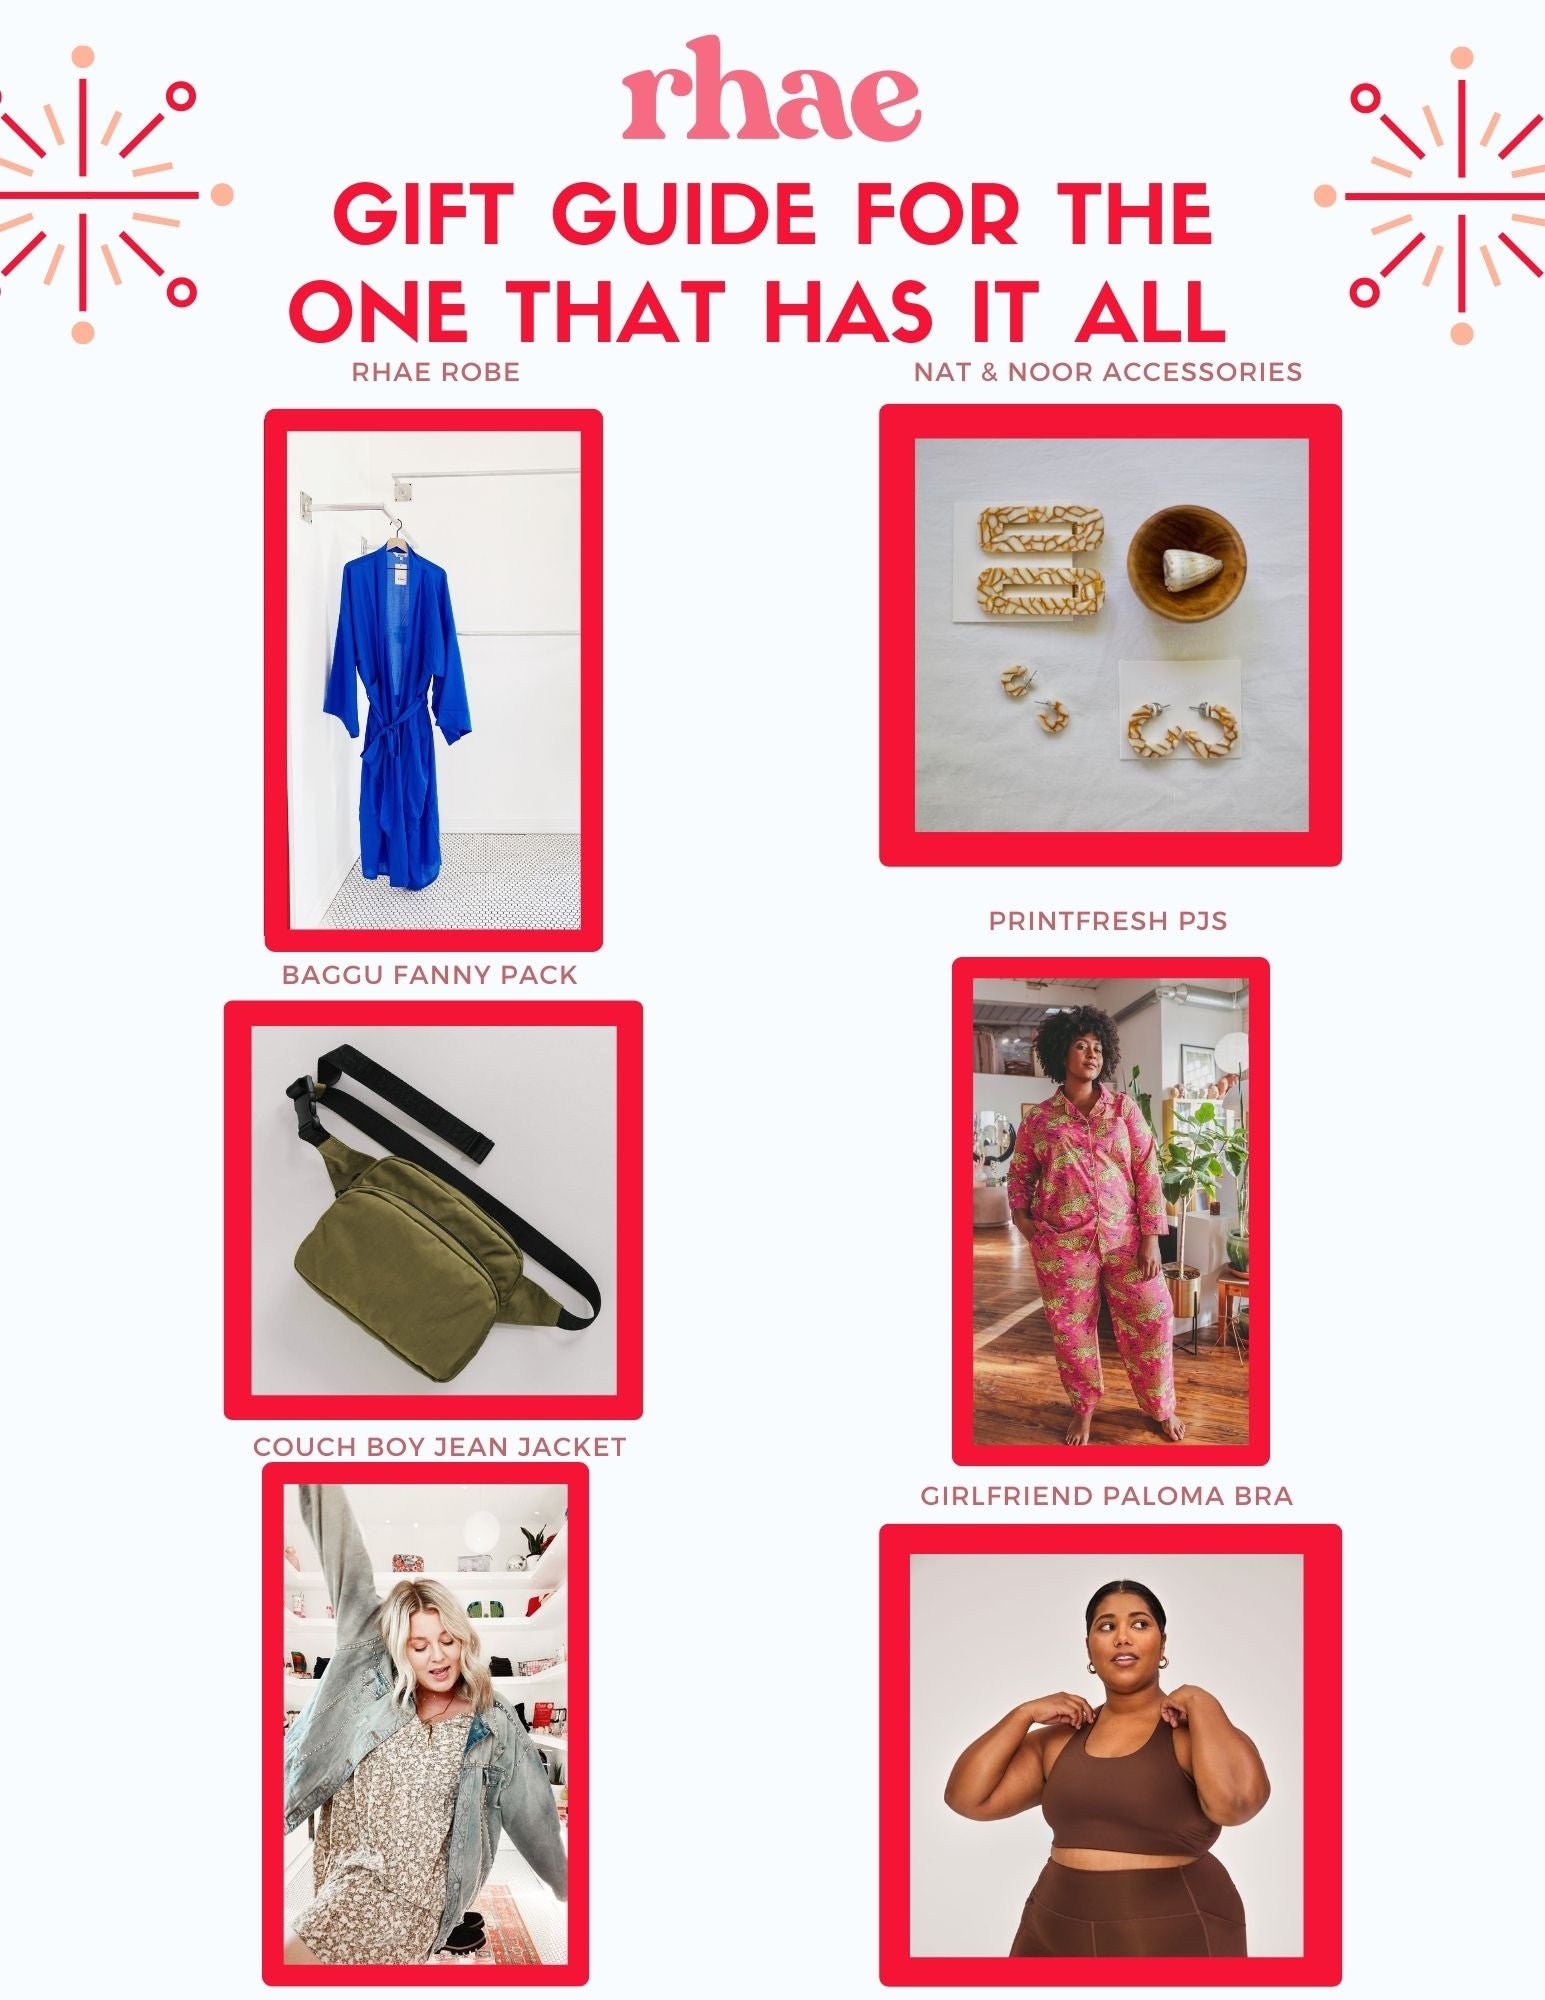 rhae gift guide for the one that has it all